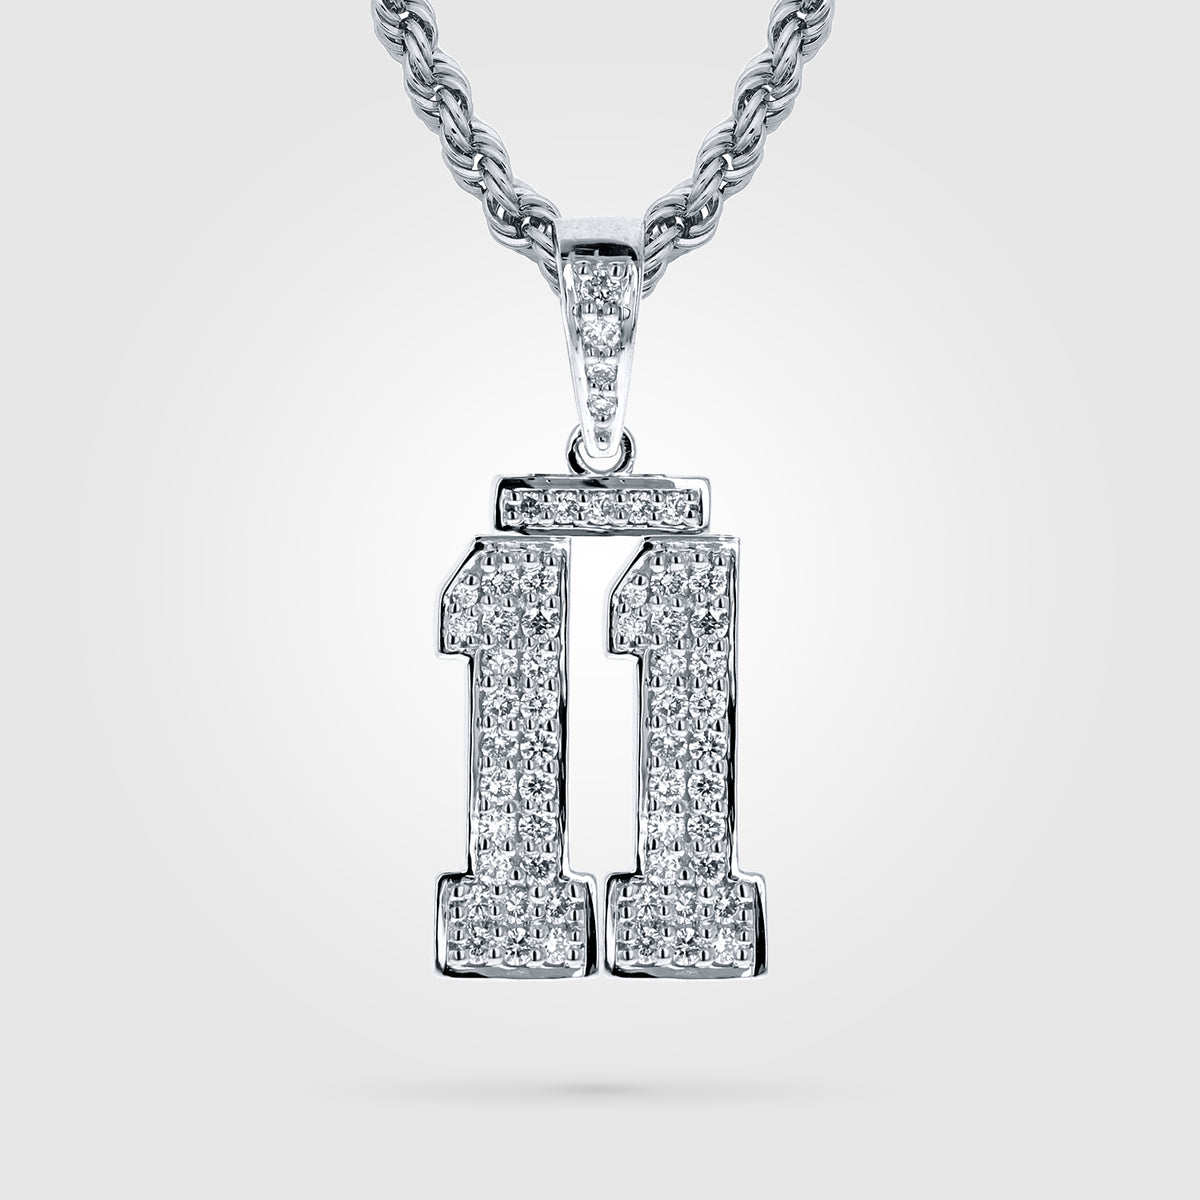 Diamond Jersey Number Necklace | Sterling Silver Digit Diamond Studded Jersey Number Necklace